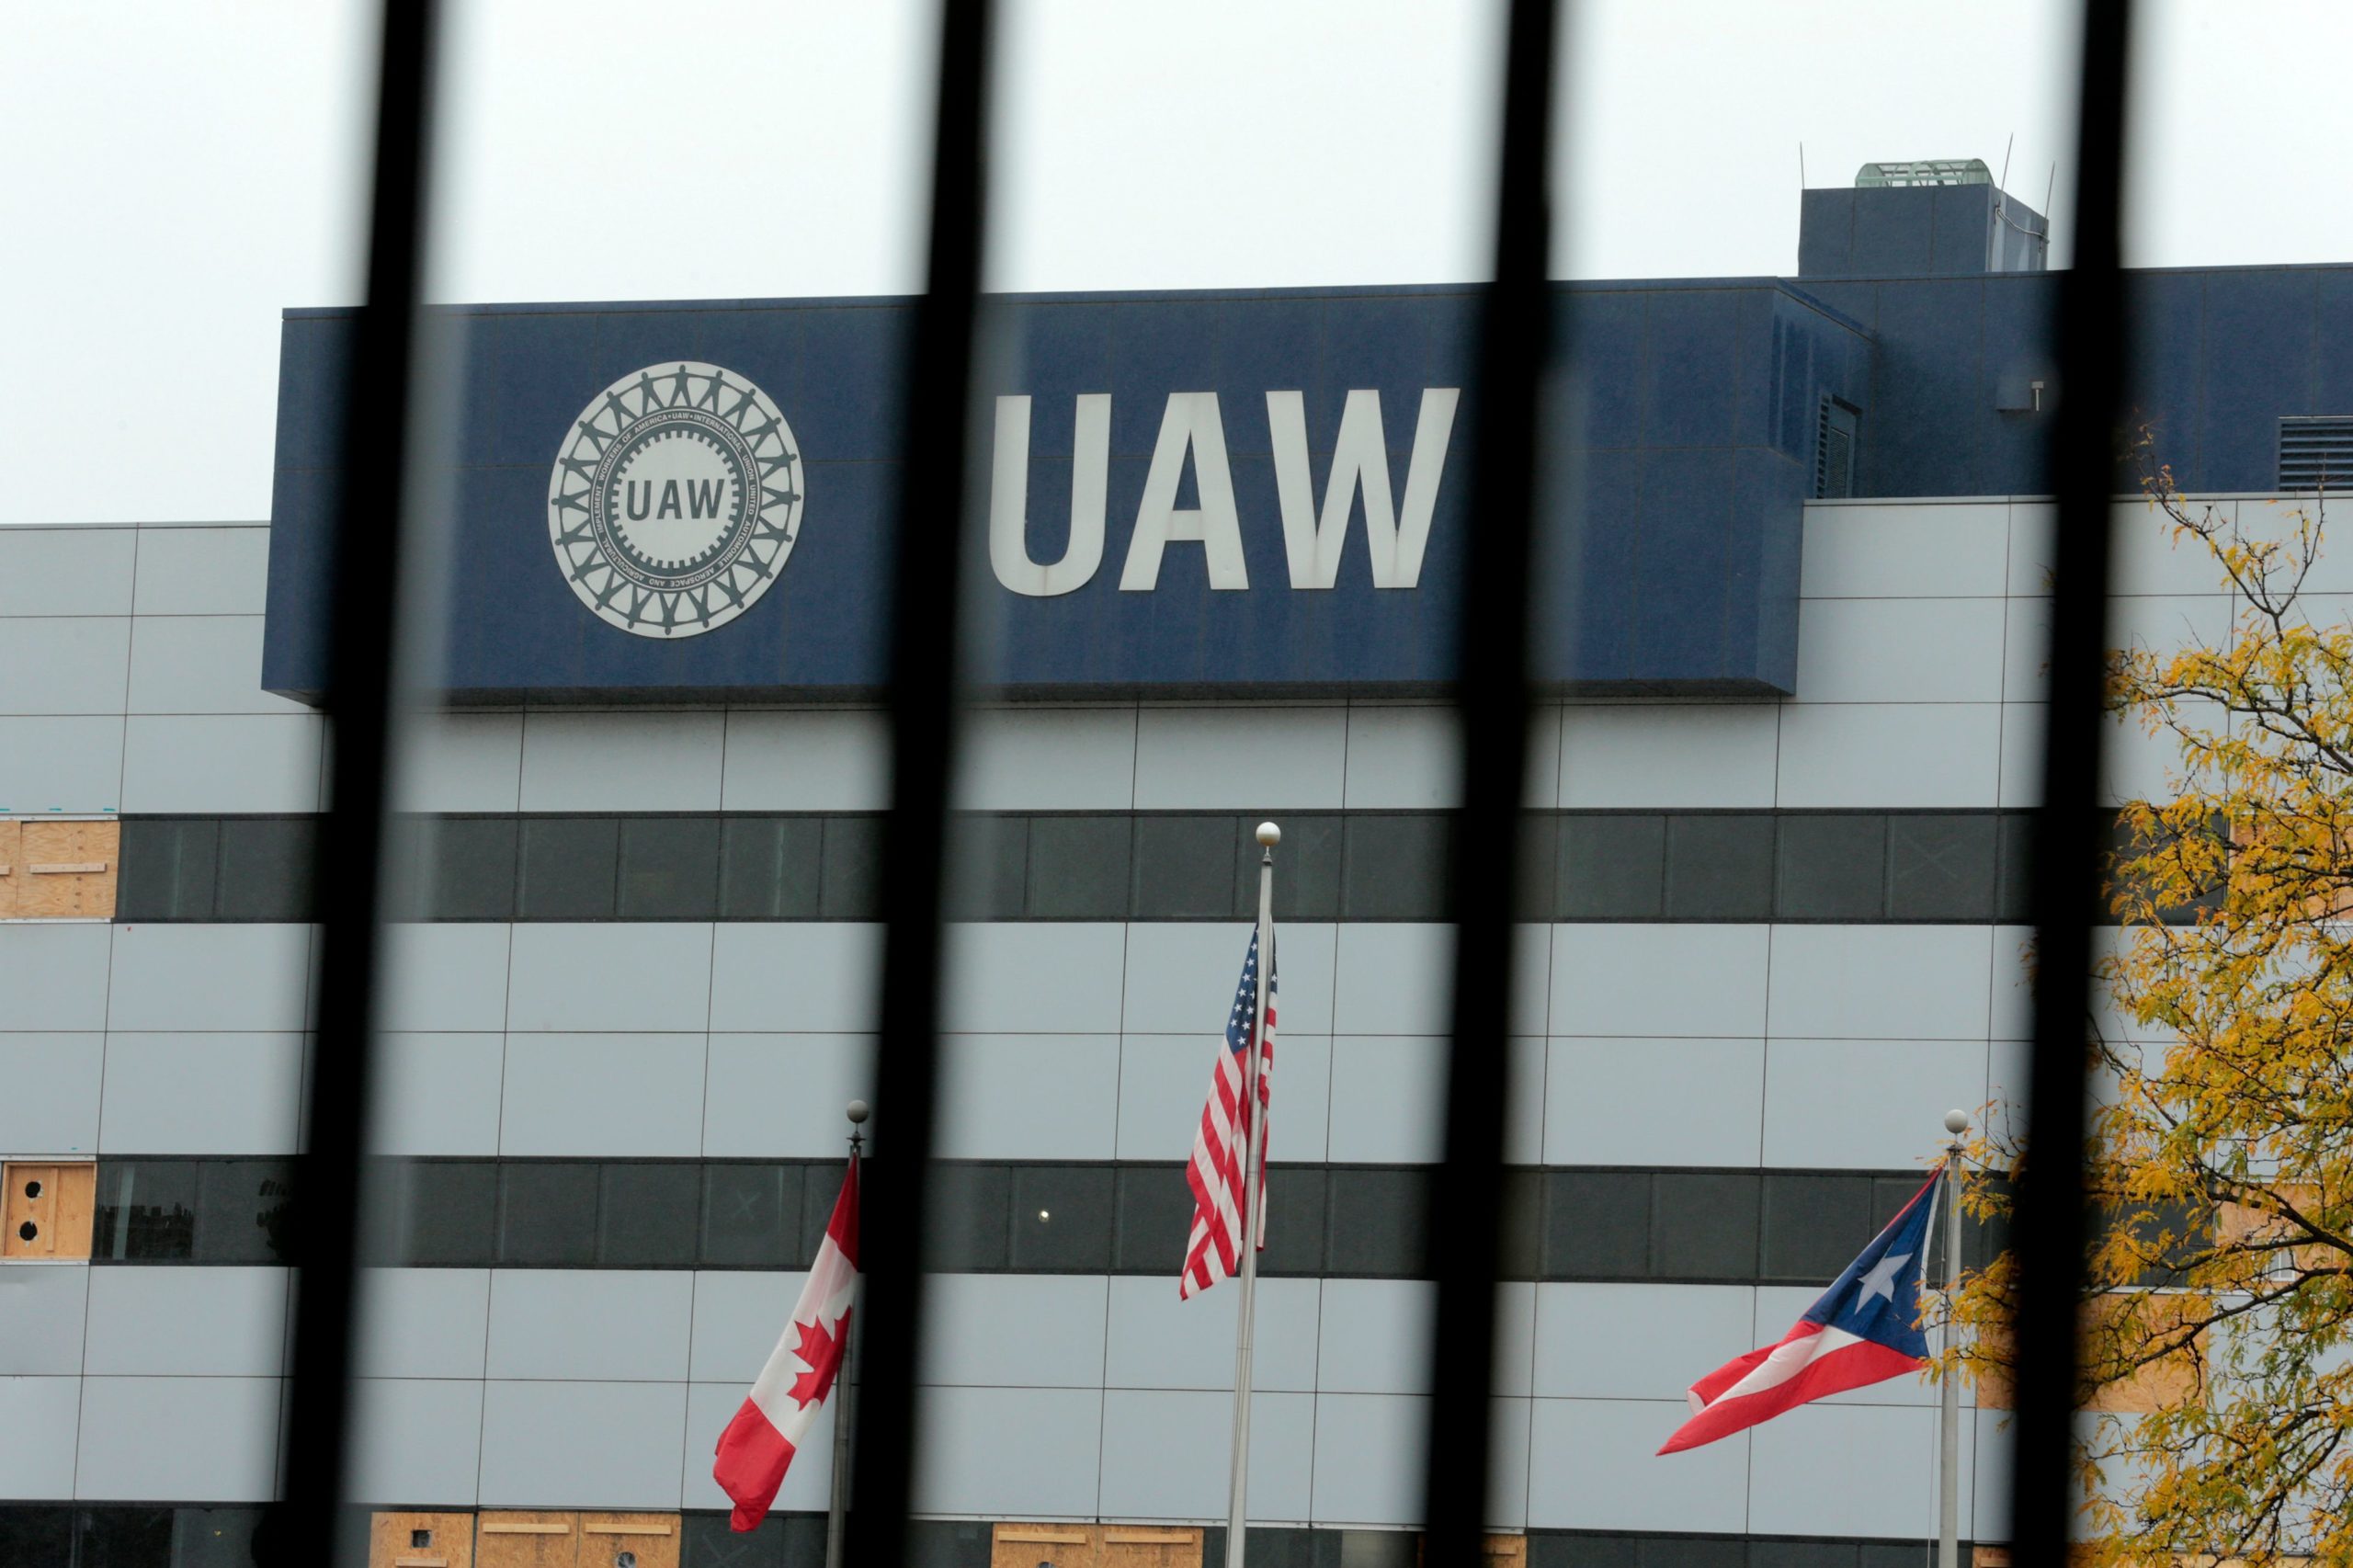 The United Auto Workers Solidarity House that is undergoing renovation is pictured in Detroit, Michigan, on October 16, 2019. (Jeff Kowalsky/ AFP via Getty Images)